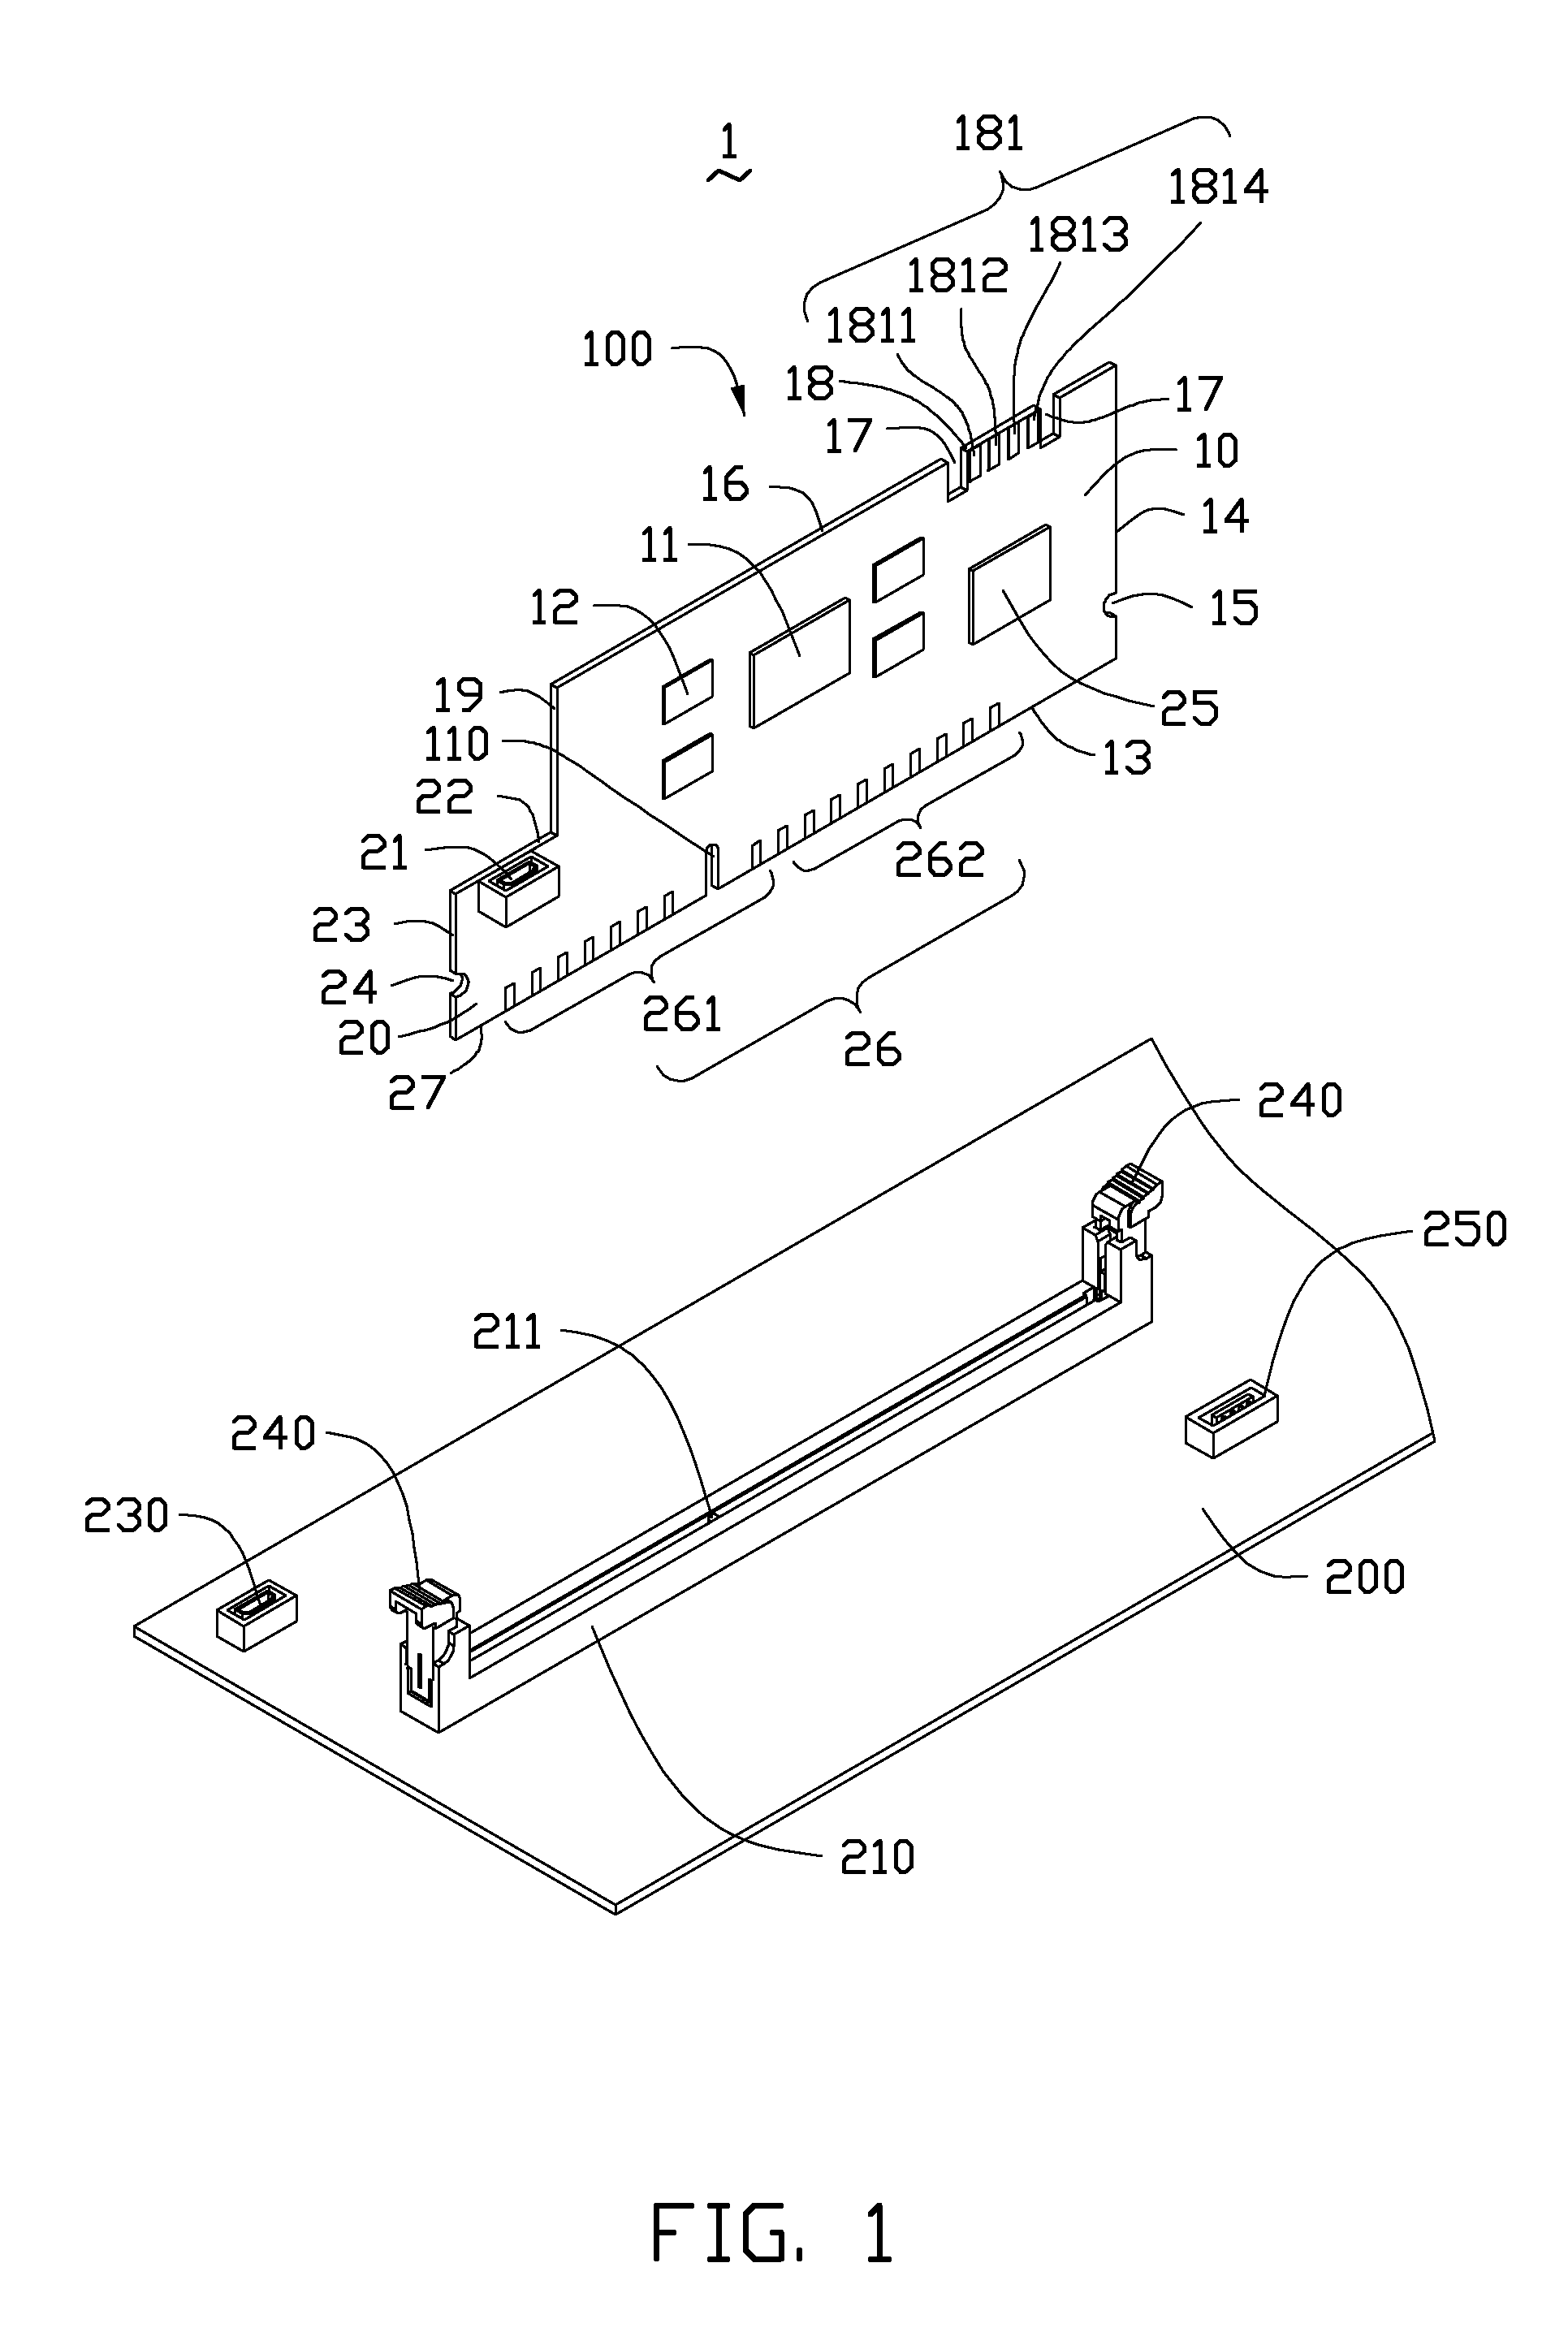 Motherboard assembly having serial advanced technology attachment dual in-line memory module